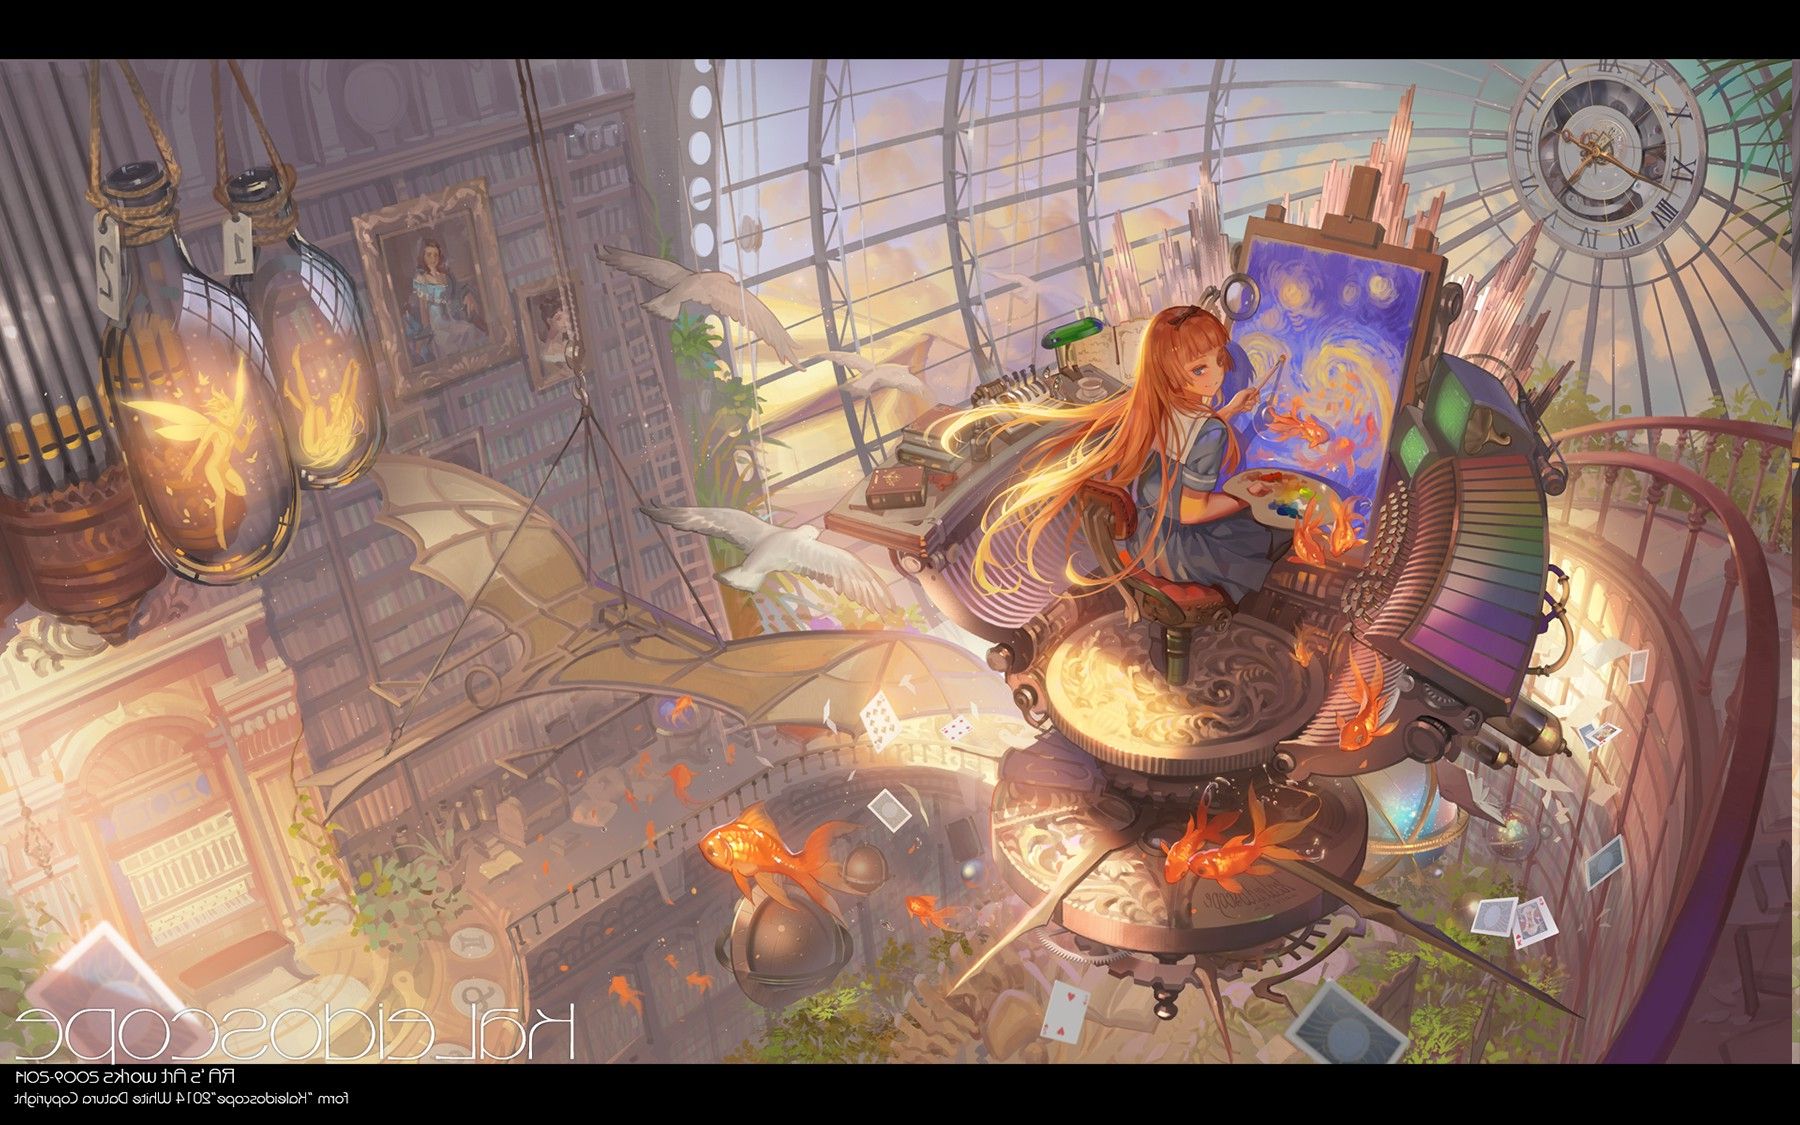 kaleidoscope, Anime, Fantasy Art, Interiors, Painting, Library, Clocks, Fish, Books, Doves, Cards, Fairies, Original Characters, Soft Shading Wallpaper HD / Desktop and Mobile Background